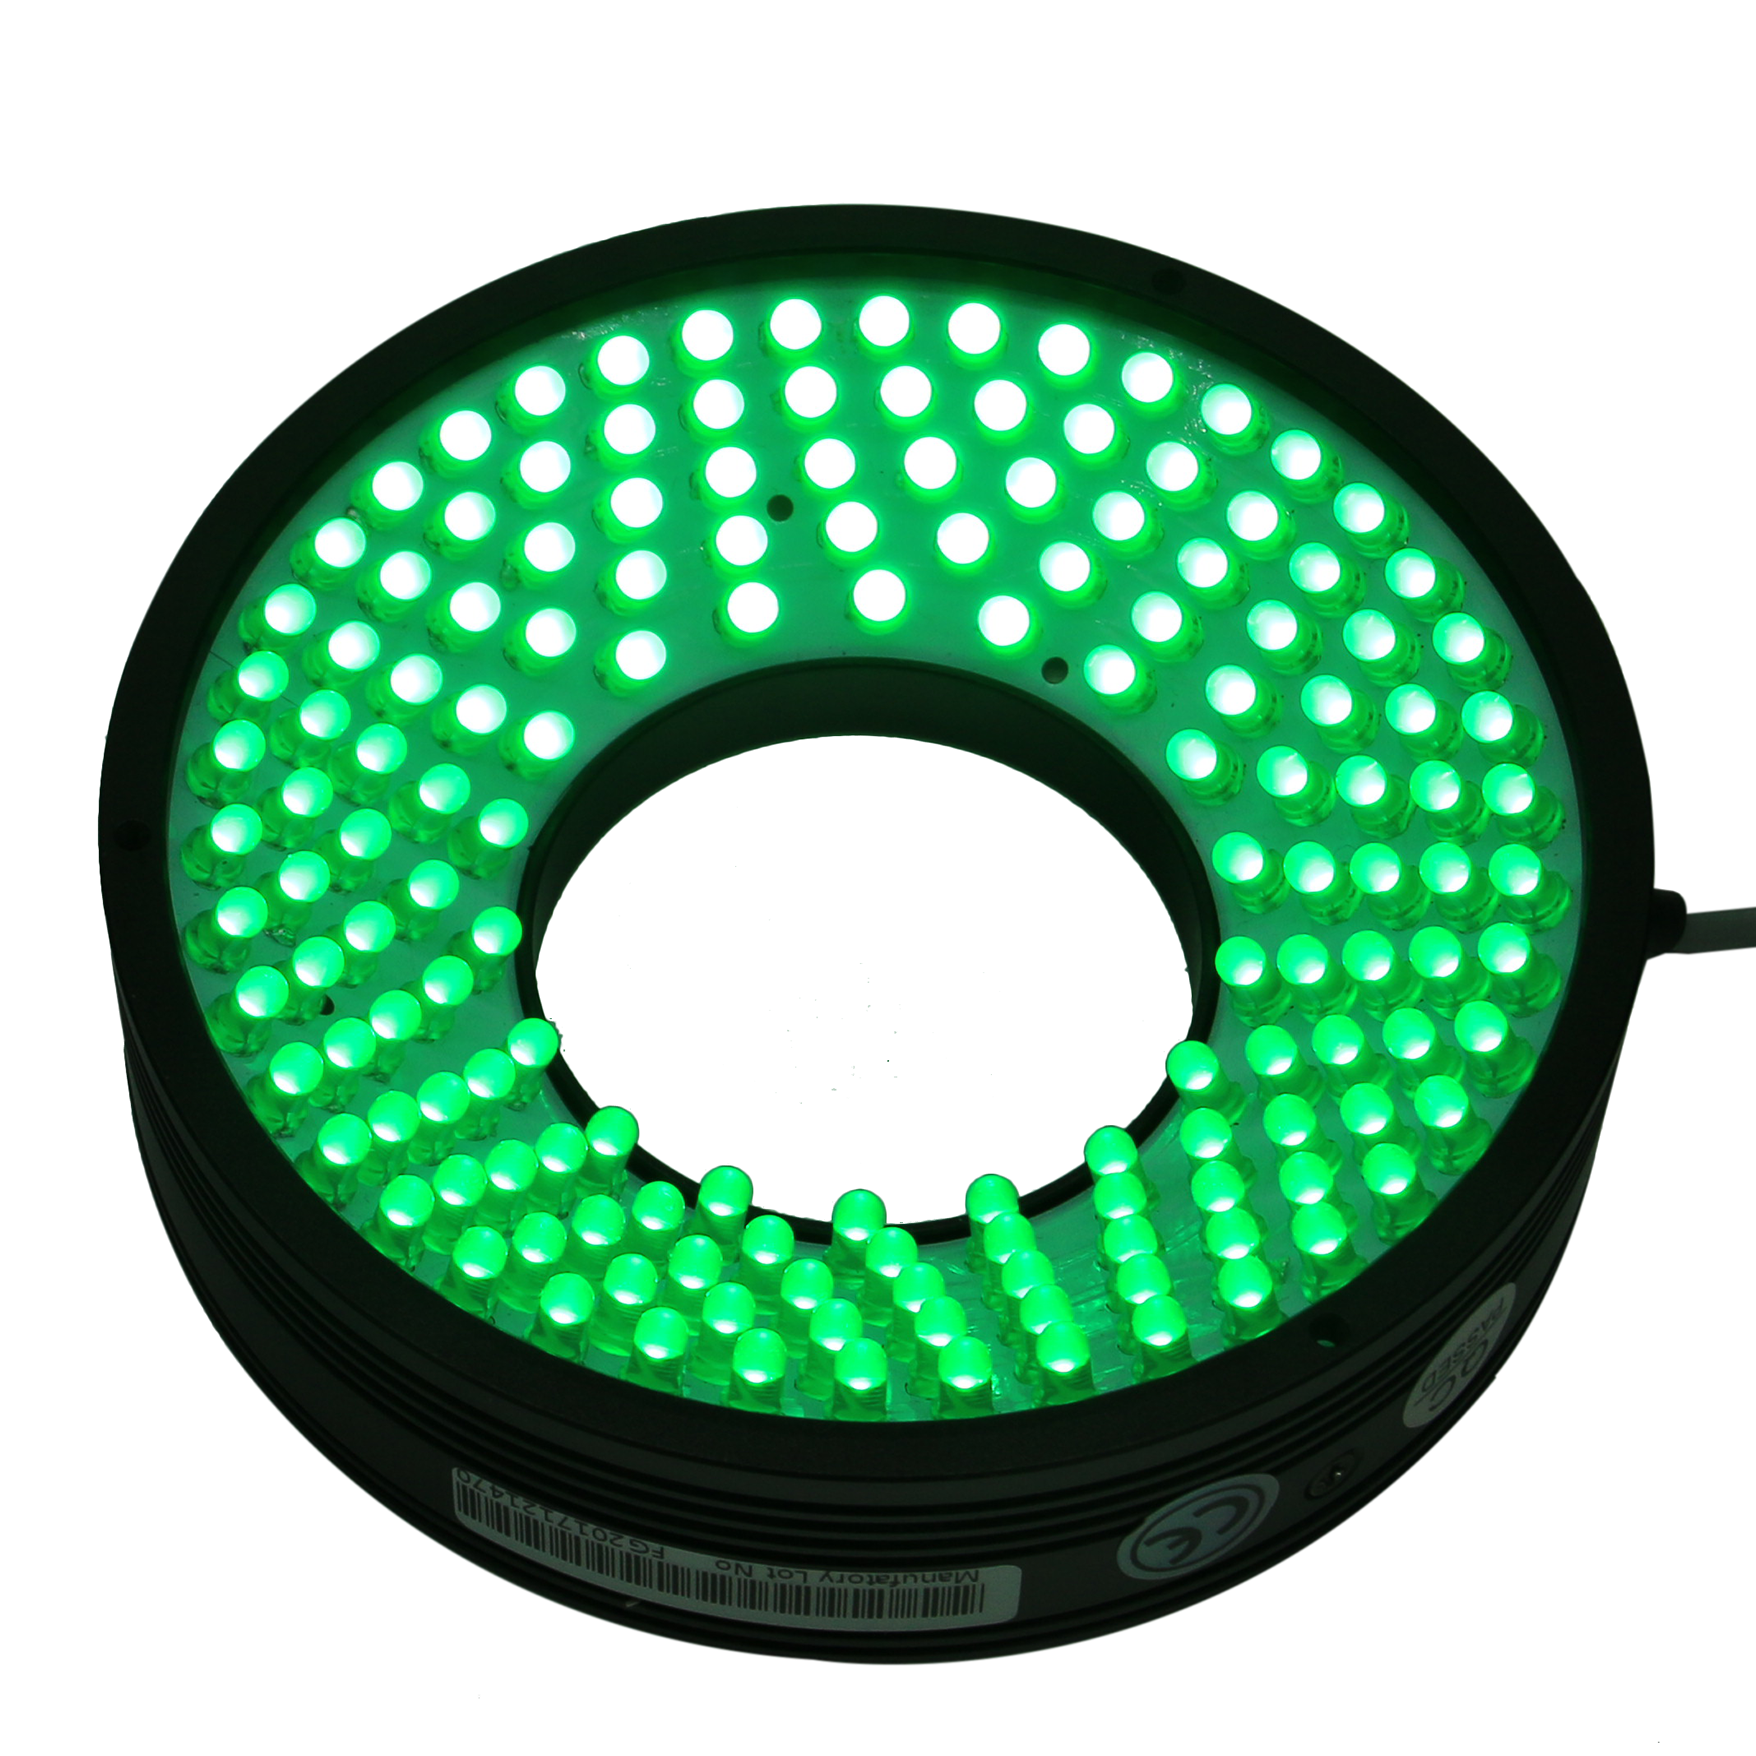 Color ccd camera china collimated led light source backlights